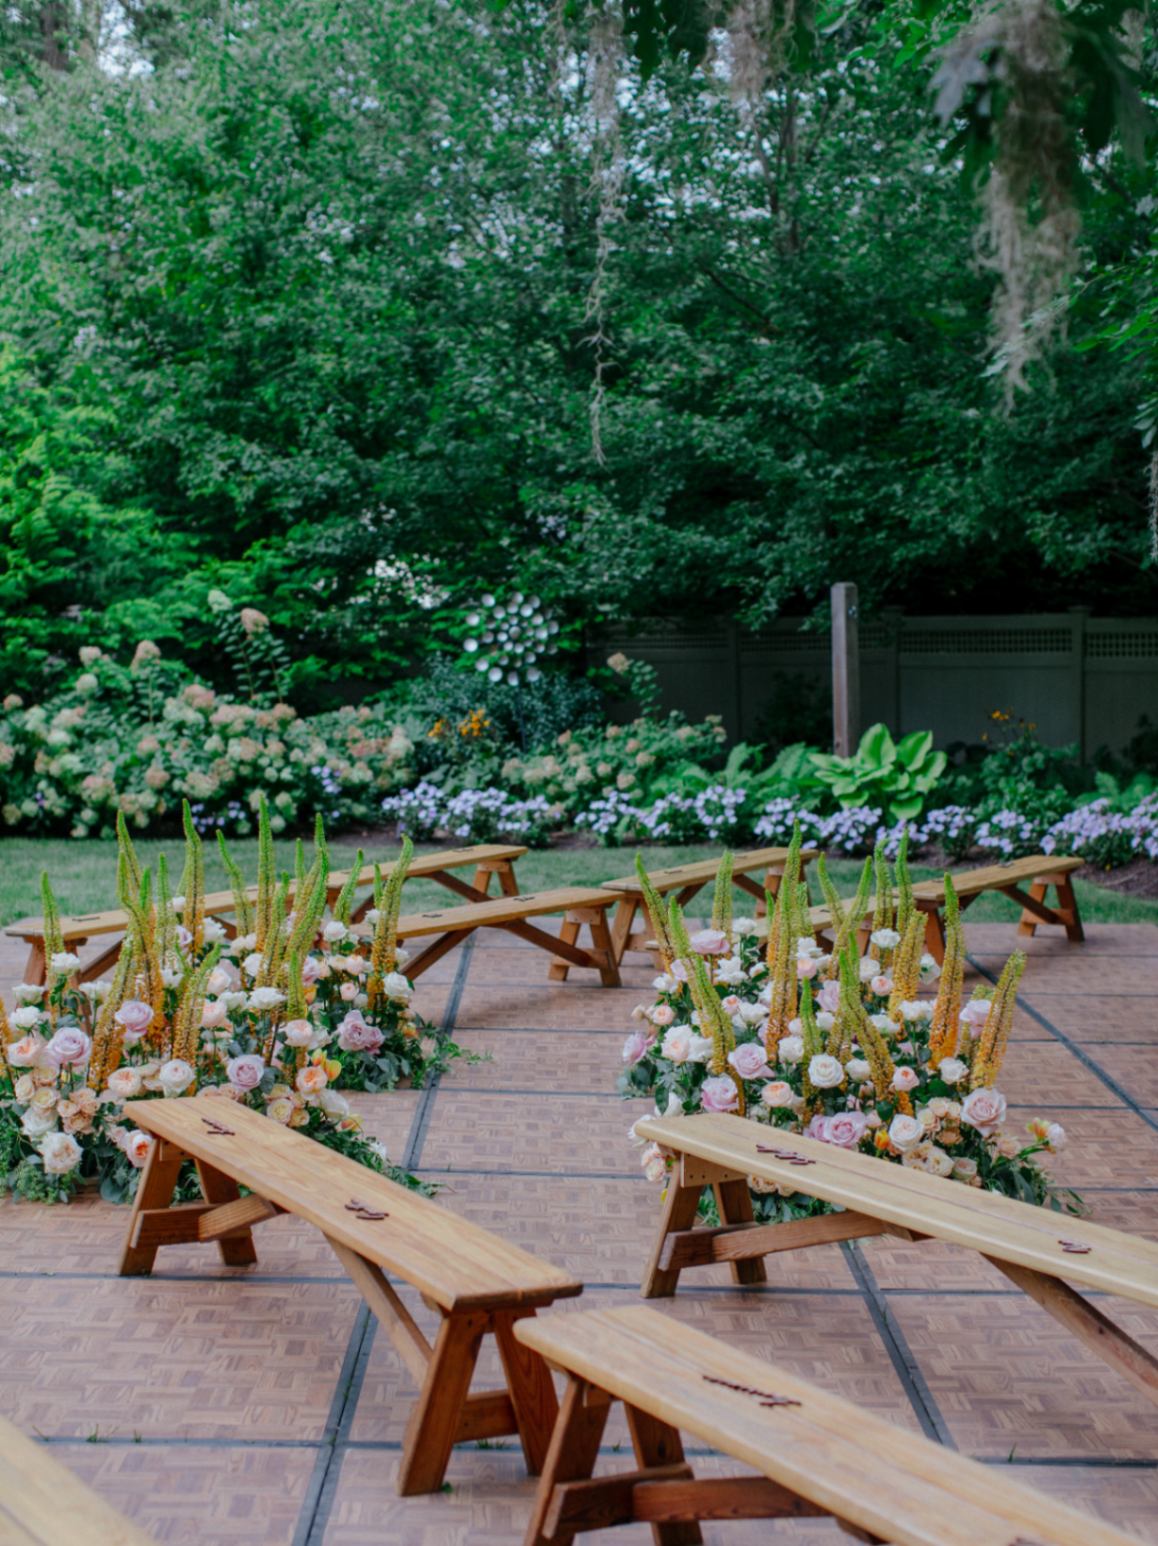 Outdoor wedding reception set up with wooden benches and flower arrangements